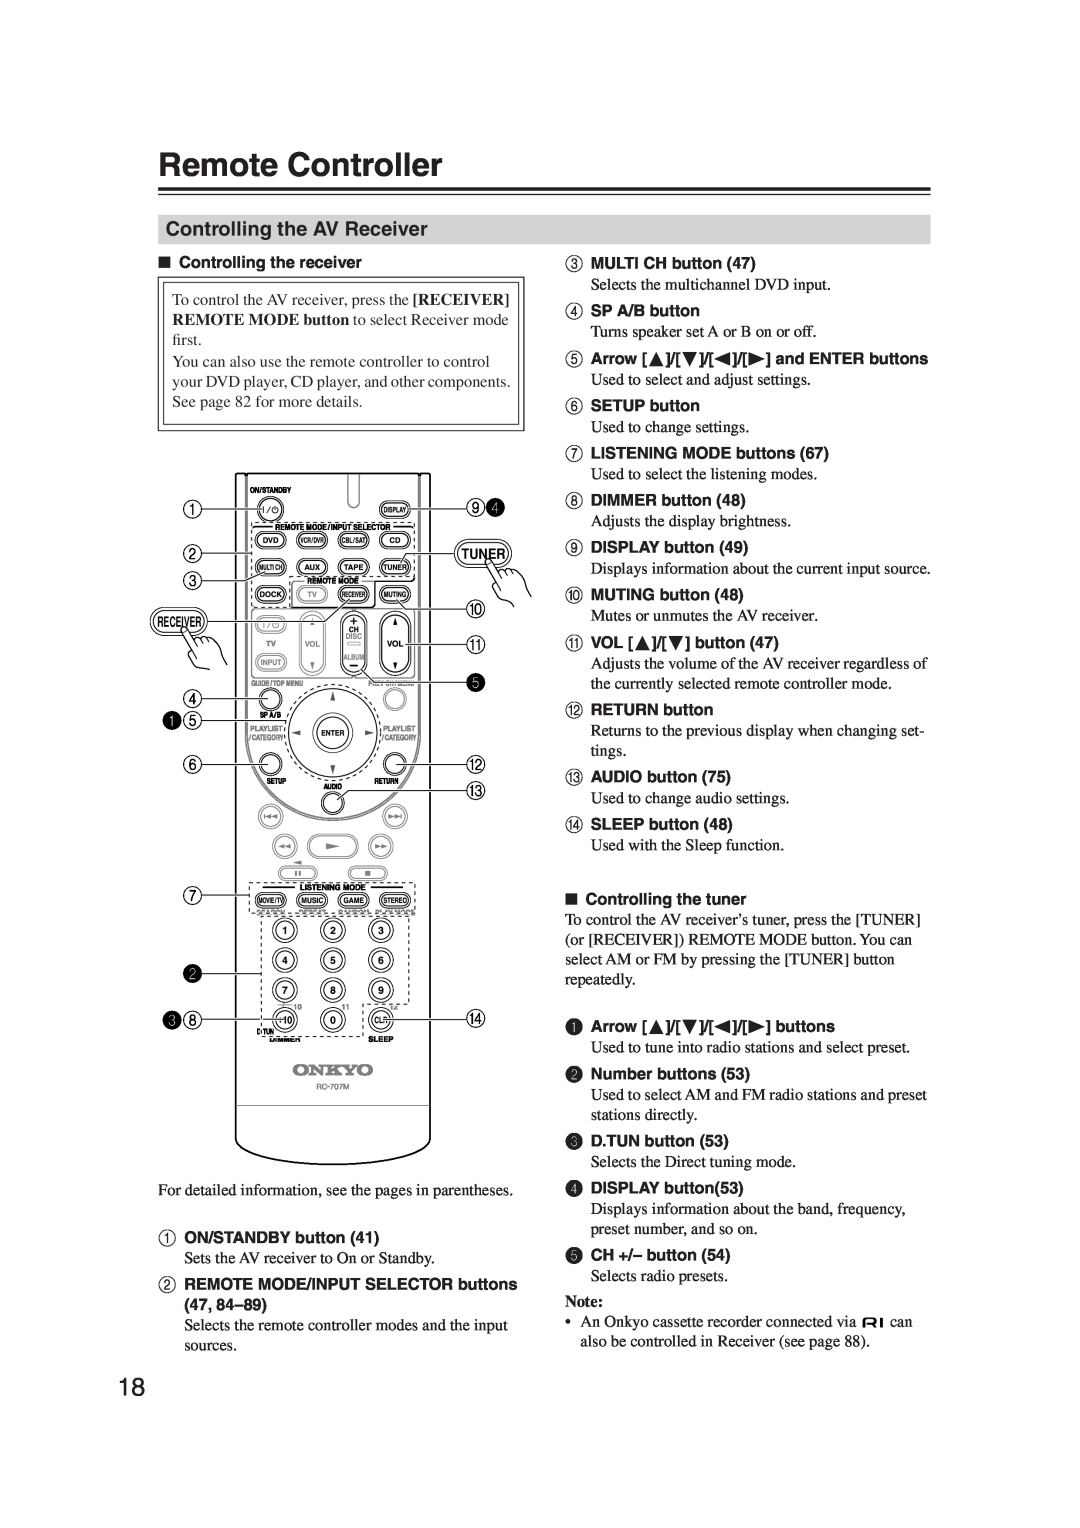 Onkyo S5100 instruction manual Remote Controller, Controlling the AV Receiver, 2 38 